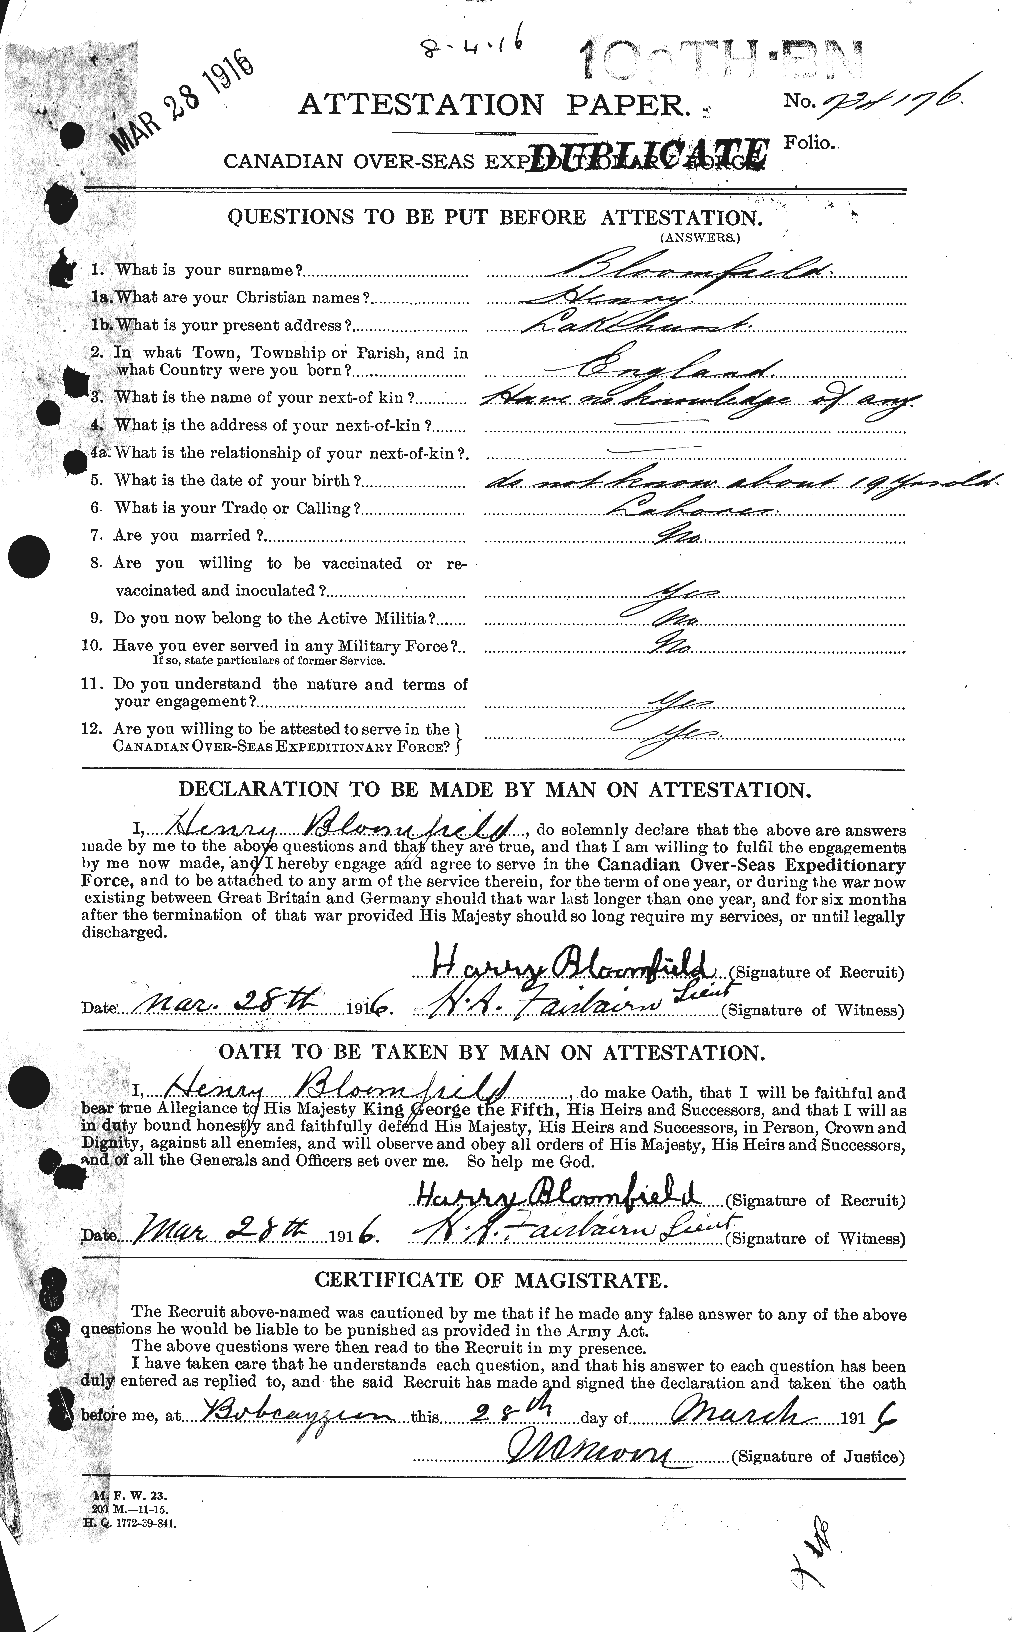 Personnel Records of the First World War - CEF 248619a